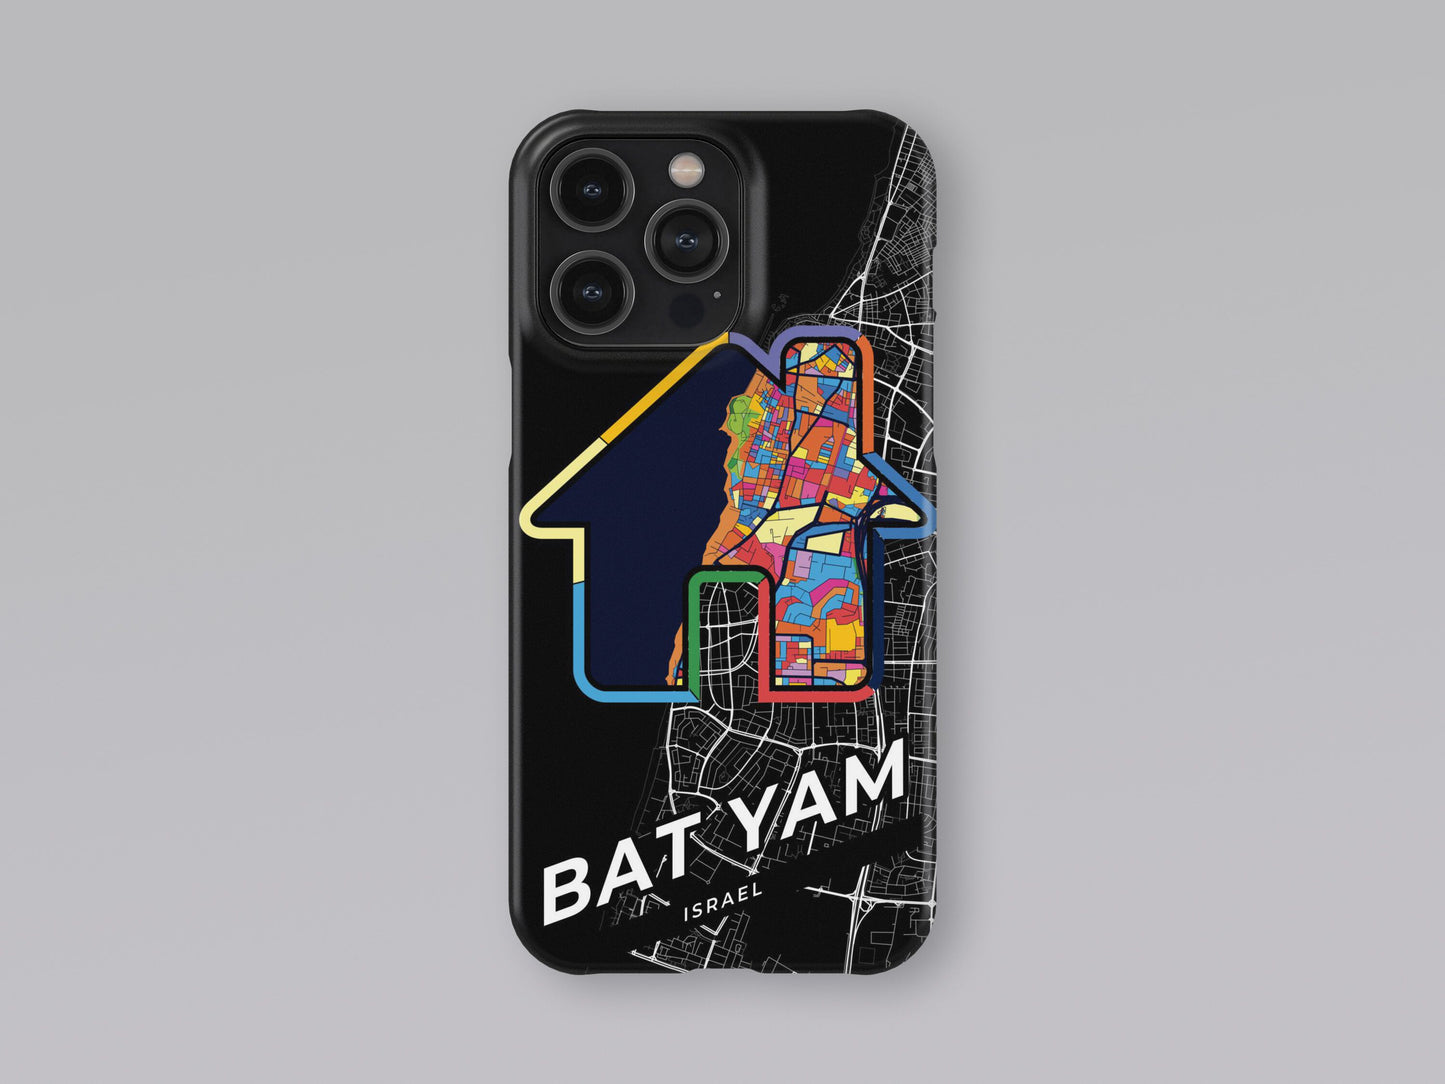 Bat Yam Israel slim phone case with colorful icon. Birthday, wedding or housewarming gift. Couple match cases. 3